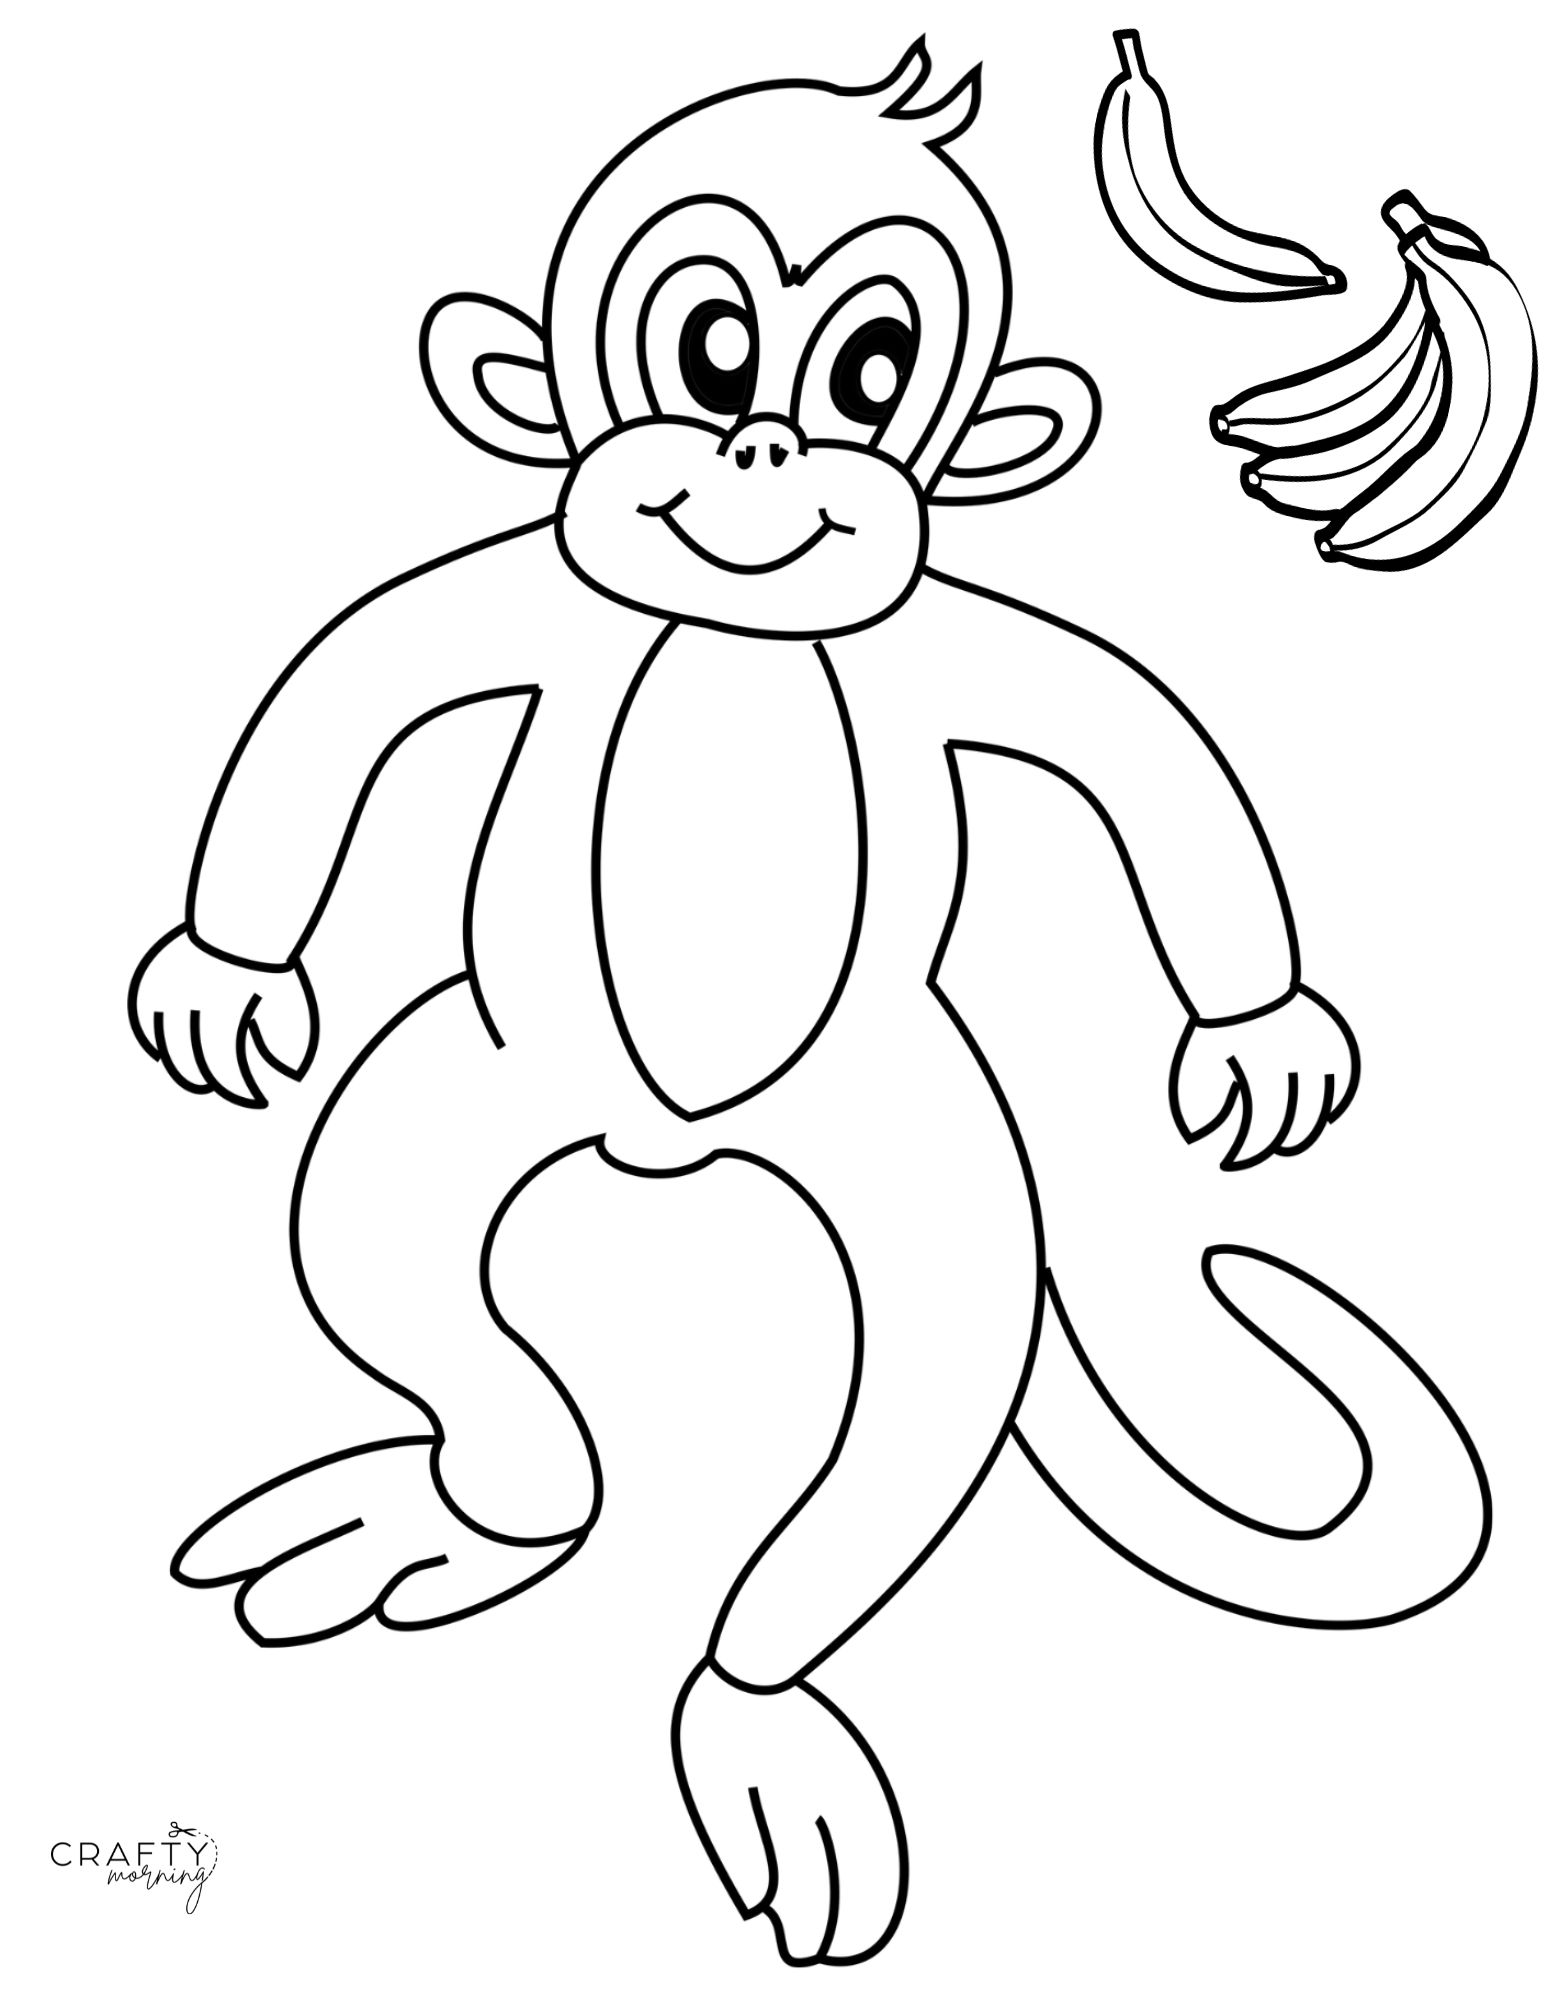 https://cdn.craftymorning.com/wp-content/uploads/2023/09/easy-monkey-drawing-coloring-page.jpg